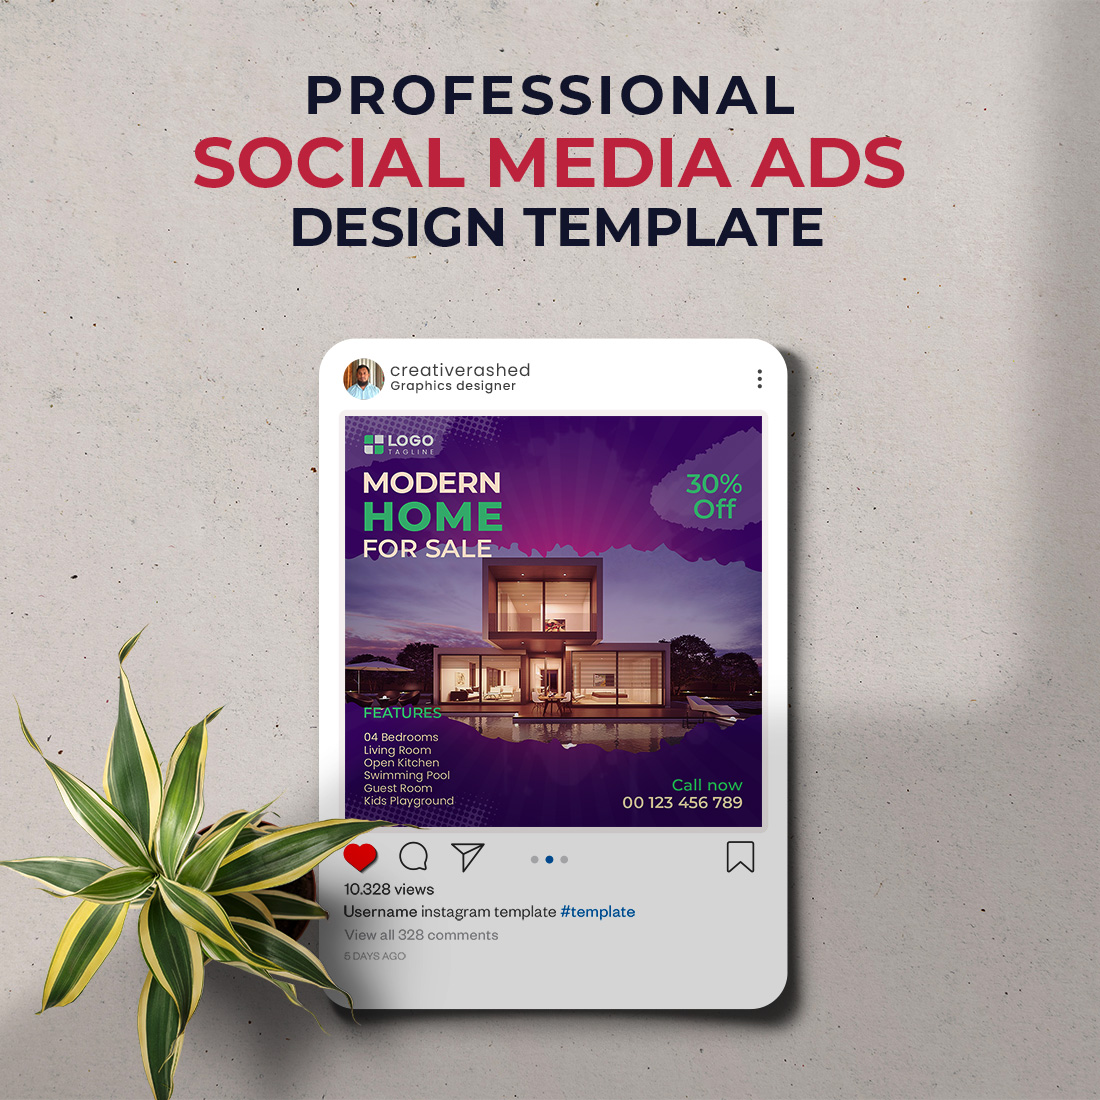 Professional & Creative Modern Home For Sale Social Media Ads Design Template preview image.